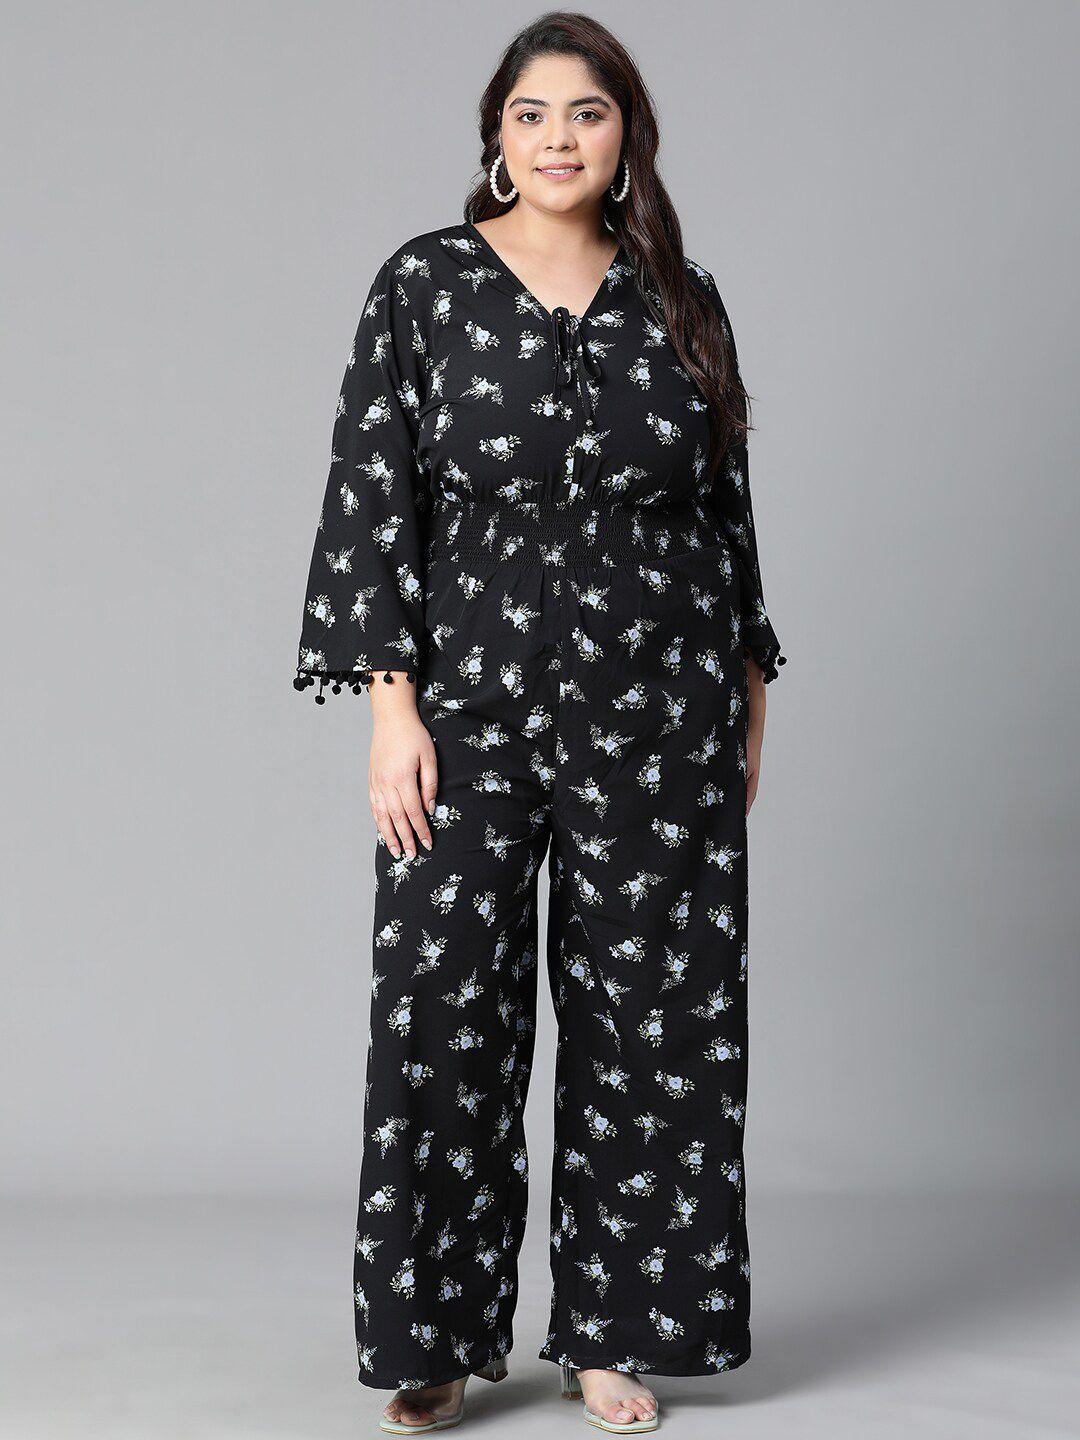 oxolloxo-plus-size-printed-tie-knot-smocked-basic-jumpsuit